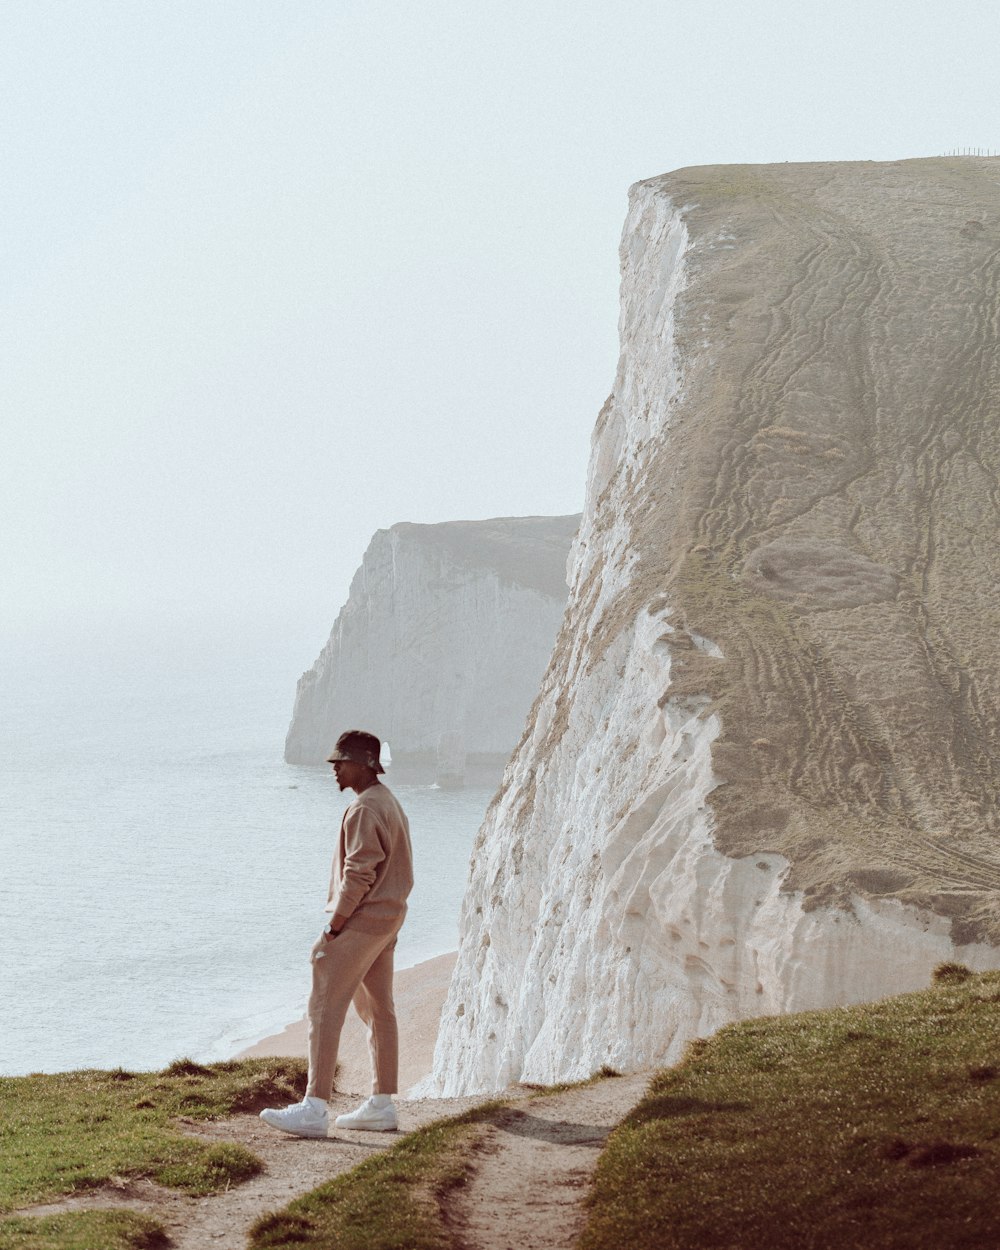 a man standing at the edge of a cliff overlooking the ocean